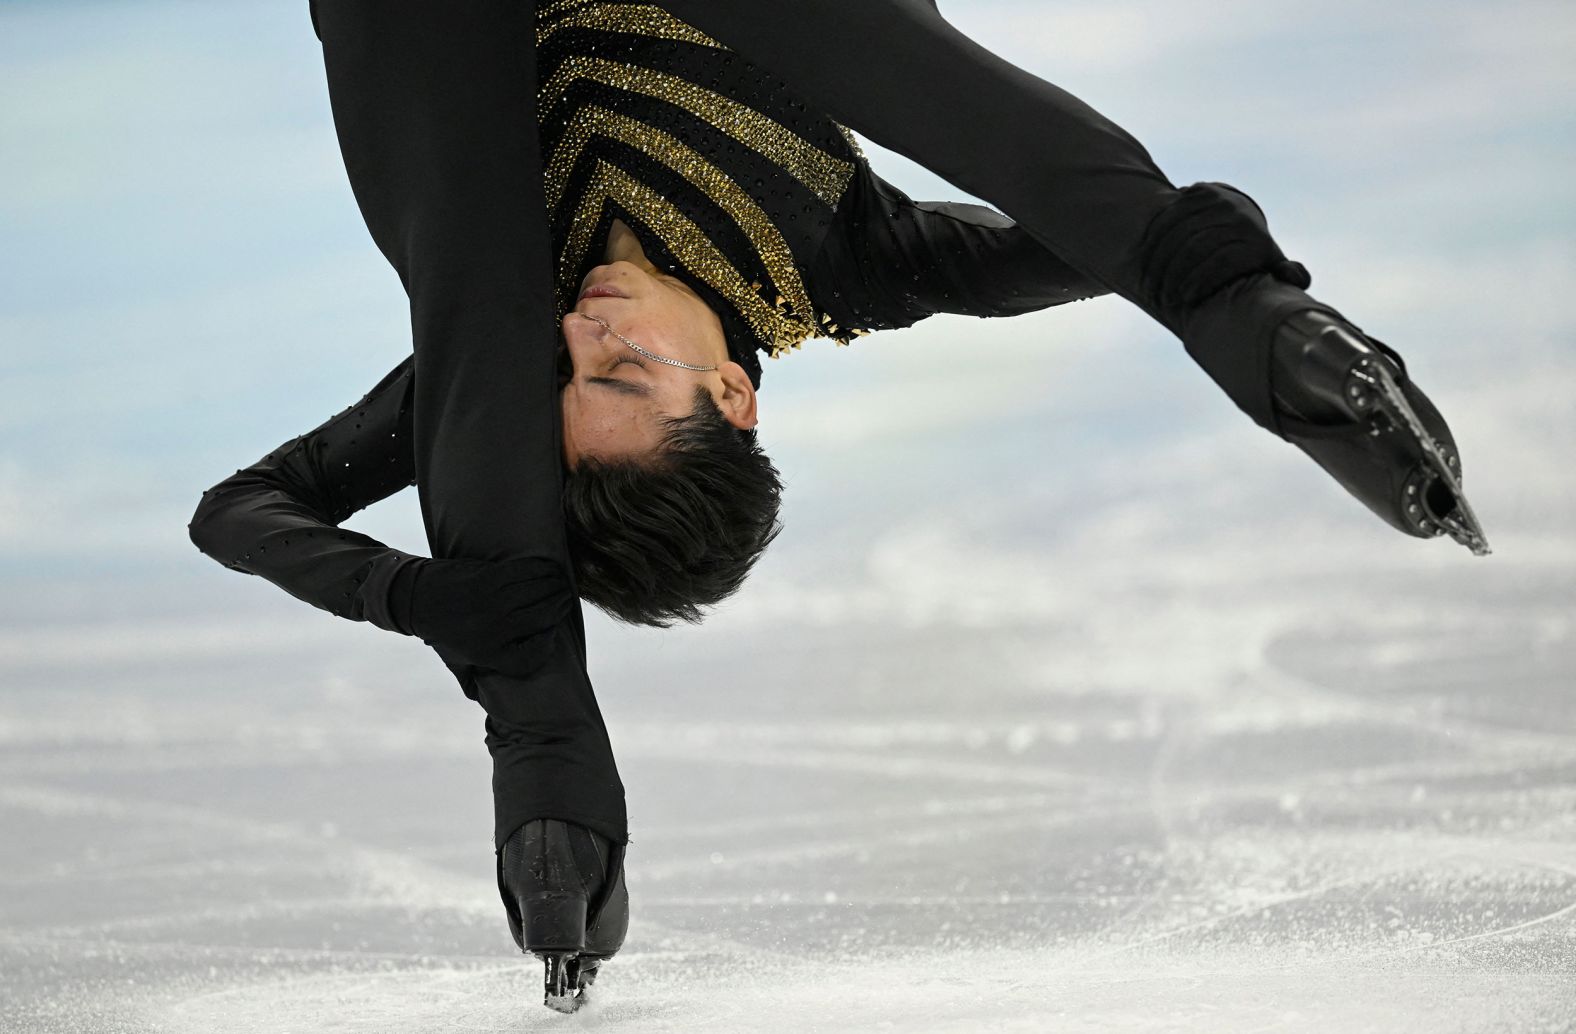 Mexican figure skater Donovan Carrillo performs his short program on February 8. Carrillo, <a href="index.php?page=&url=https%3A%2F%2Fwww.cnn.com%2Fworld%2Flive-news%2Fbeijing-winter-olympics-02-08-22-spt%2Fh_405d93109c7f78b272e6aea4e1a2c87a" target="_blank">Mexico's first Olympic figure skater in 30 years,</a> was also his country's flag bearer in the opening ceremony.